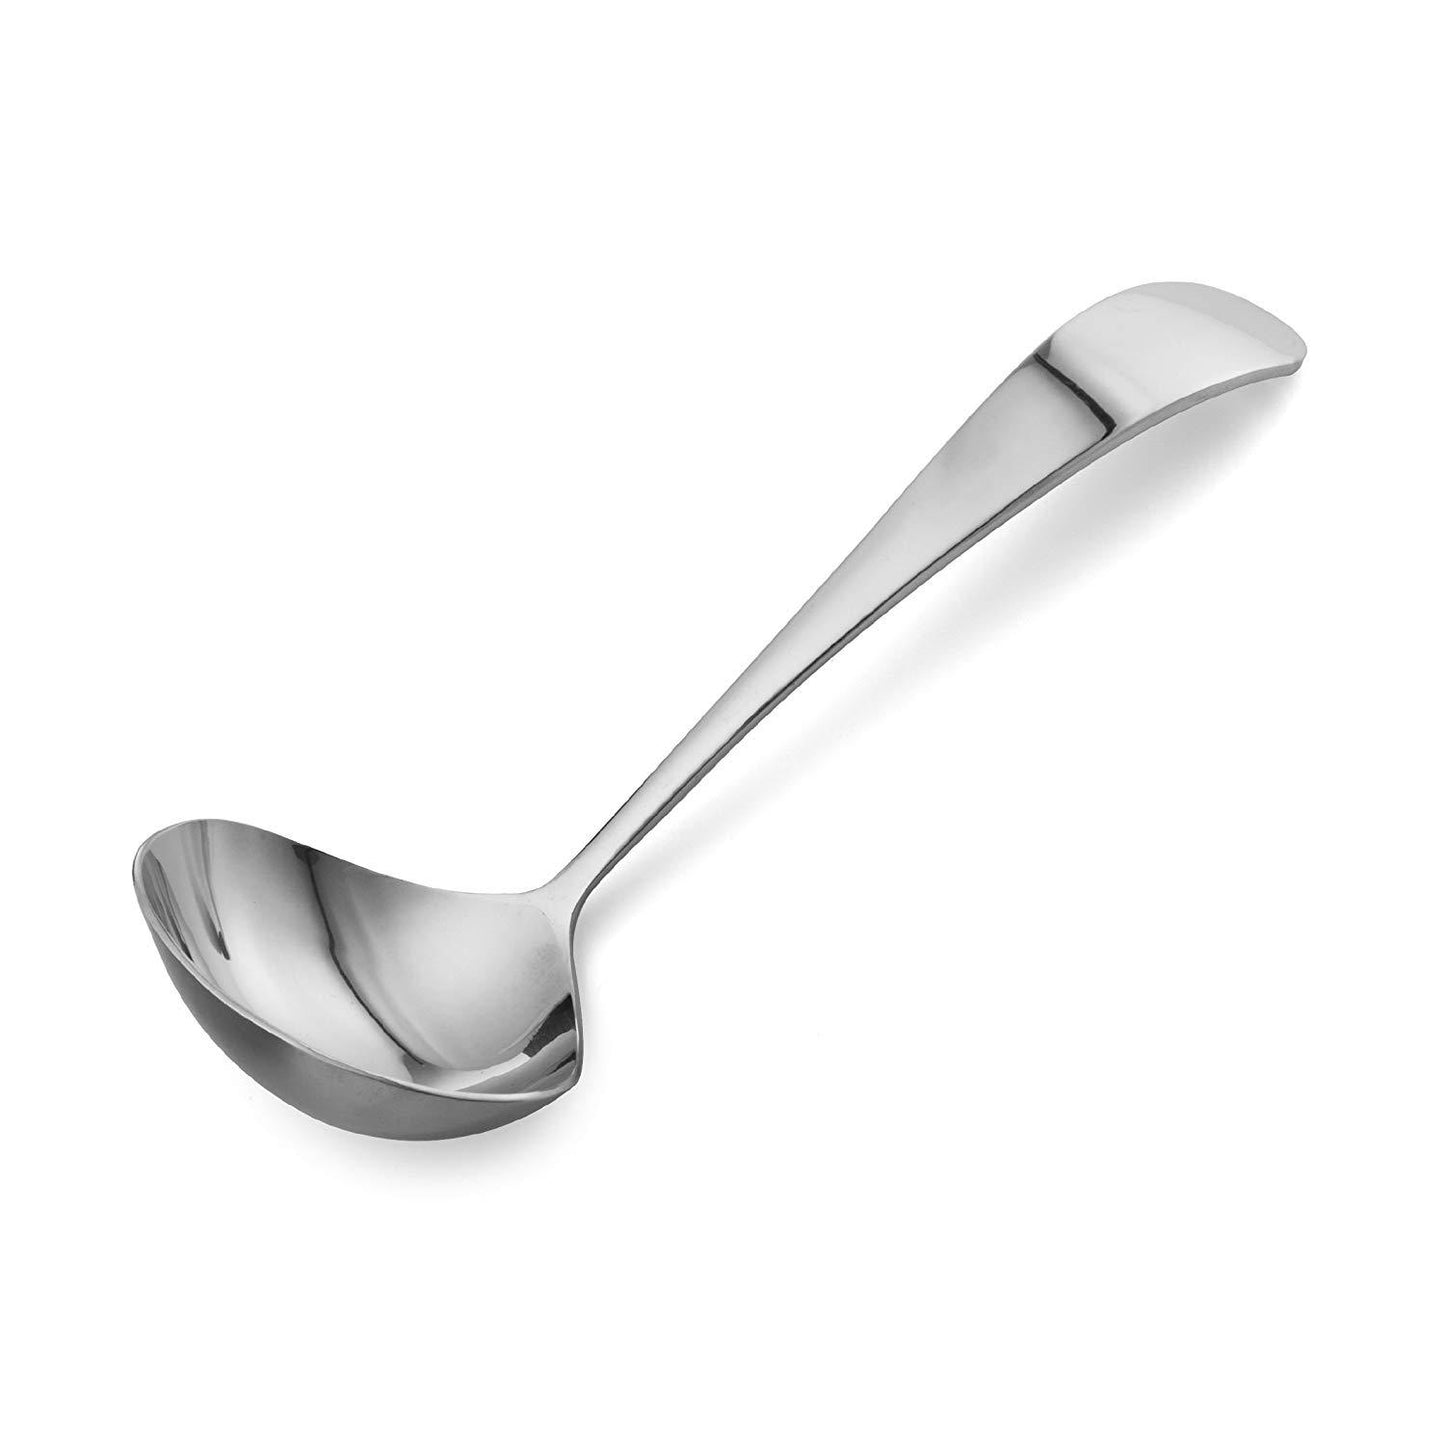 angled view of sauce ladle on a white background